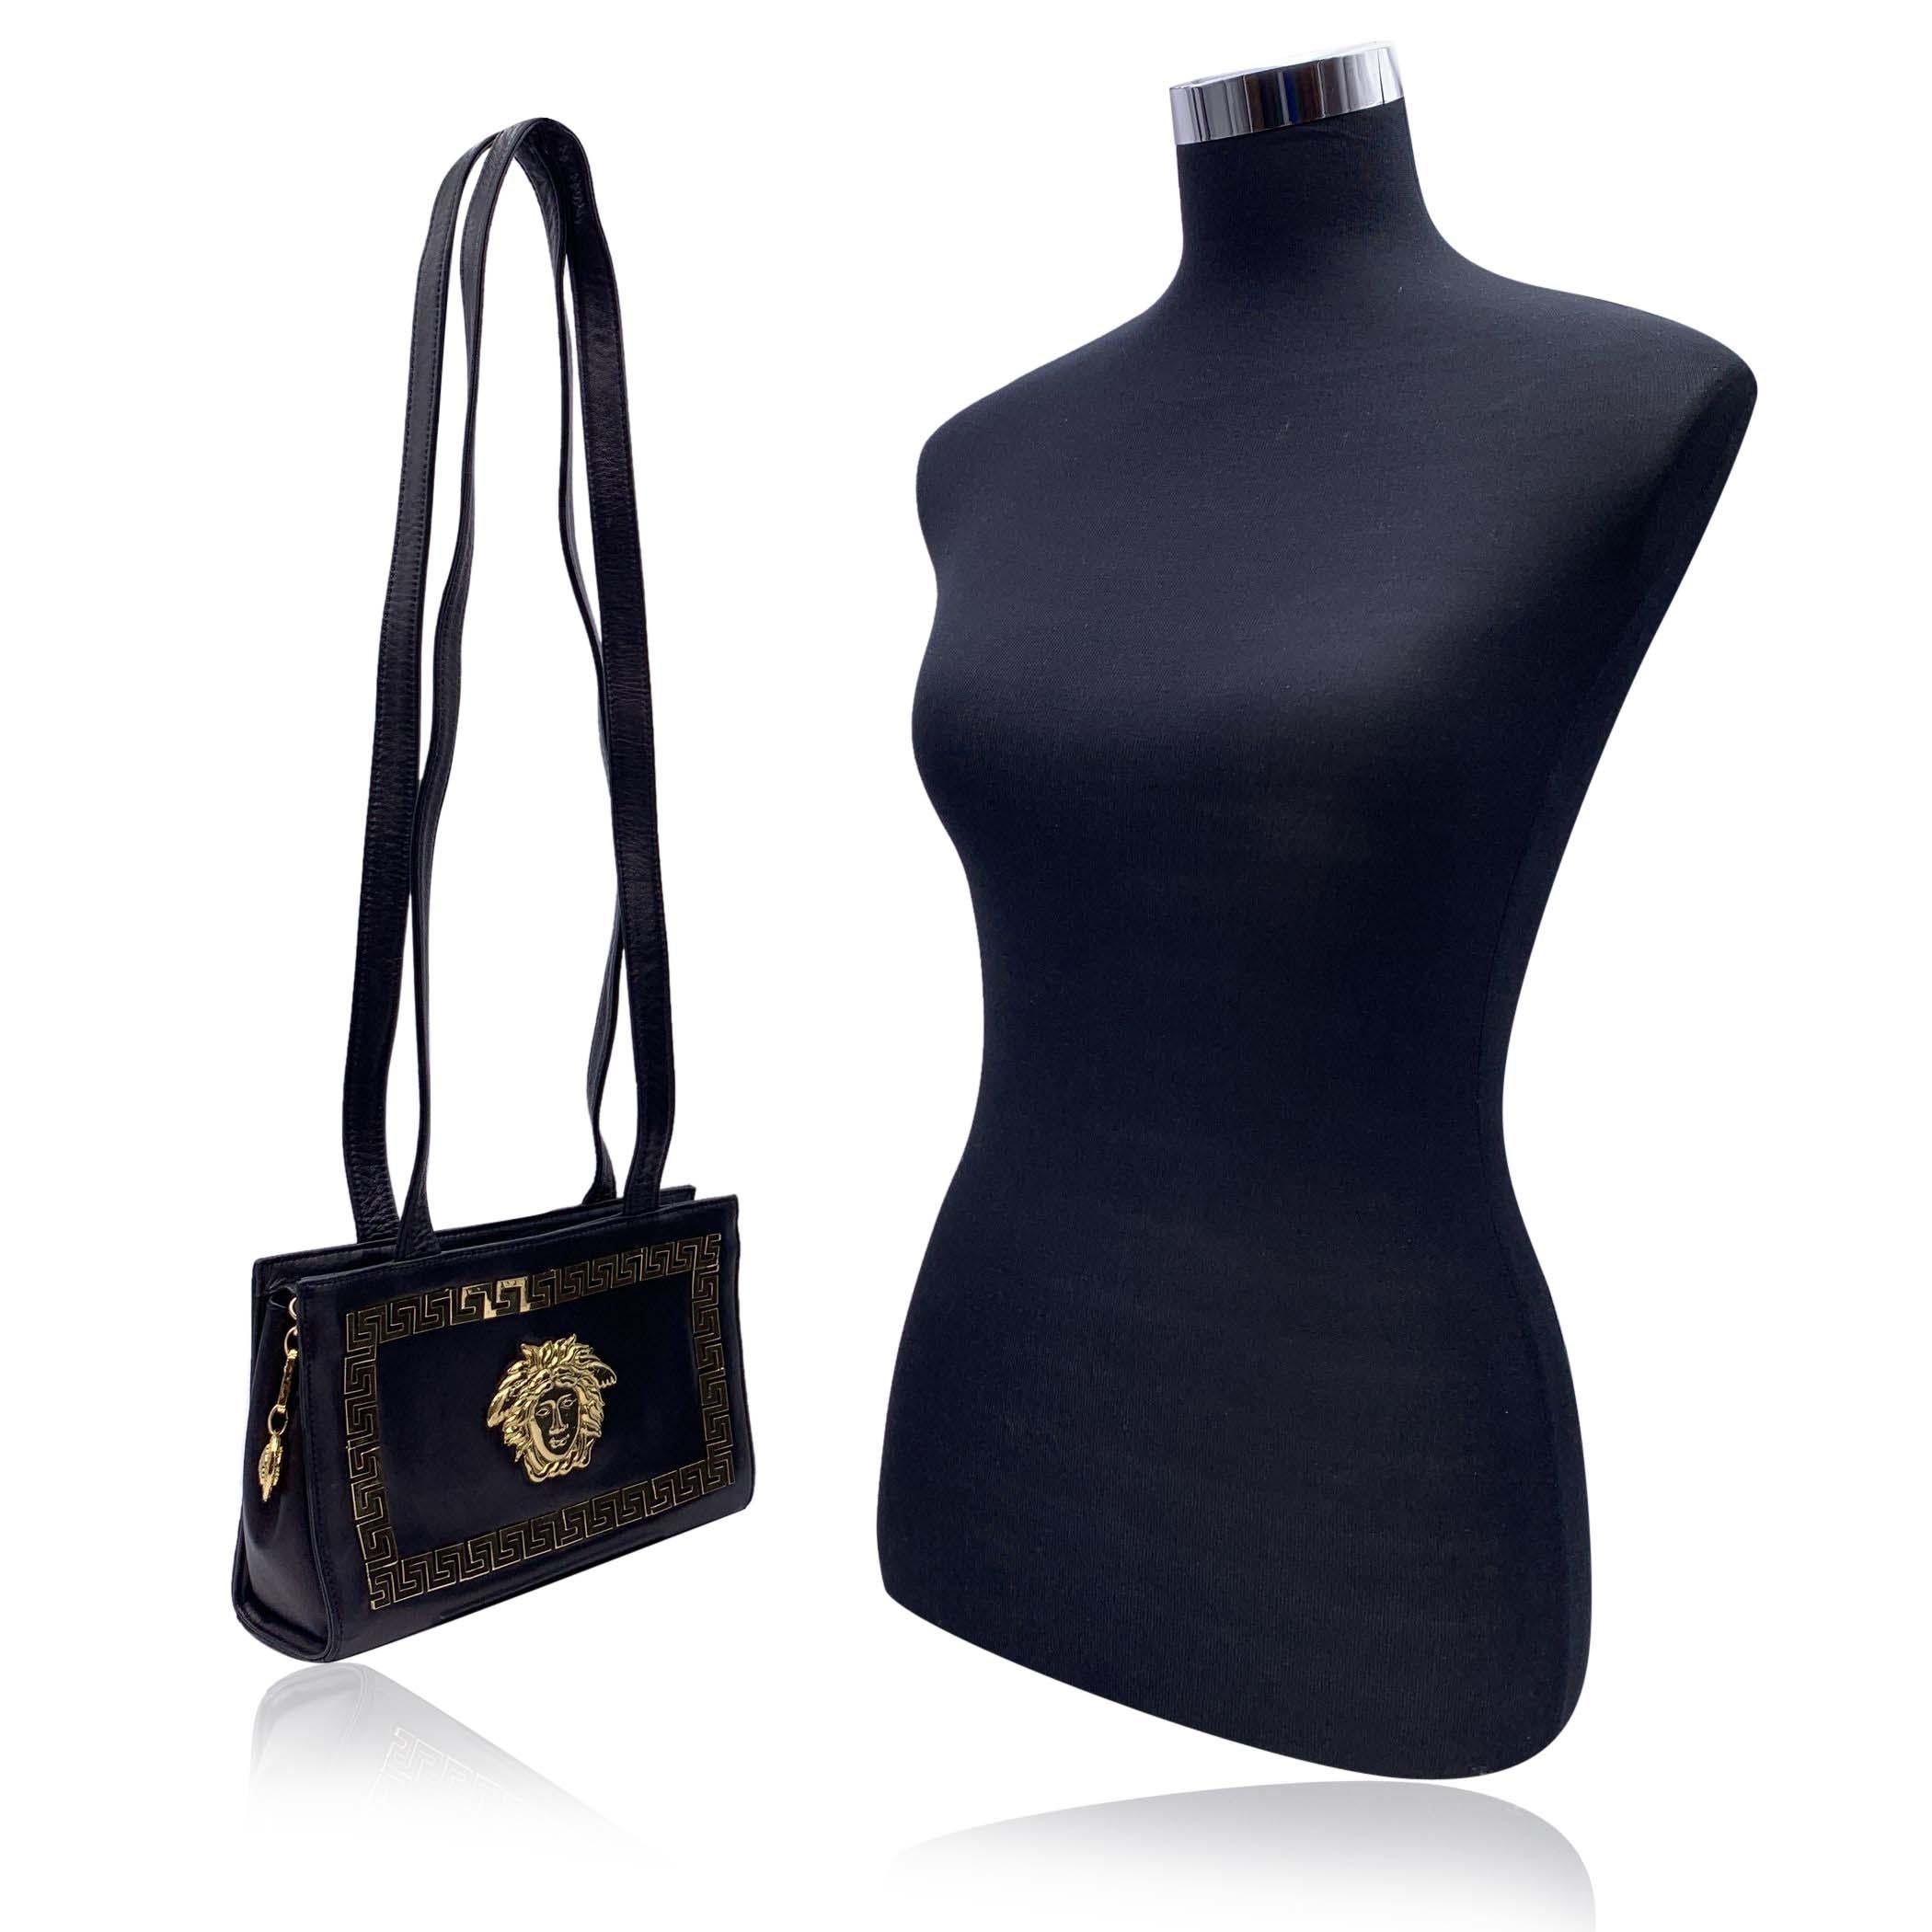 Beautiful vintage Gianni Versace Couture shoulder bag from the 1990s. Crafted in black leather with big gold metal Medusa logo on the front and greek key borders. Long shoulder straps. Upper zipper closure with Medusa medallion zipper pull. Black